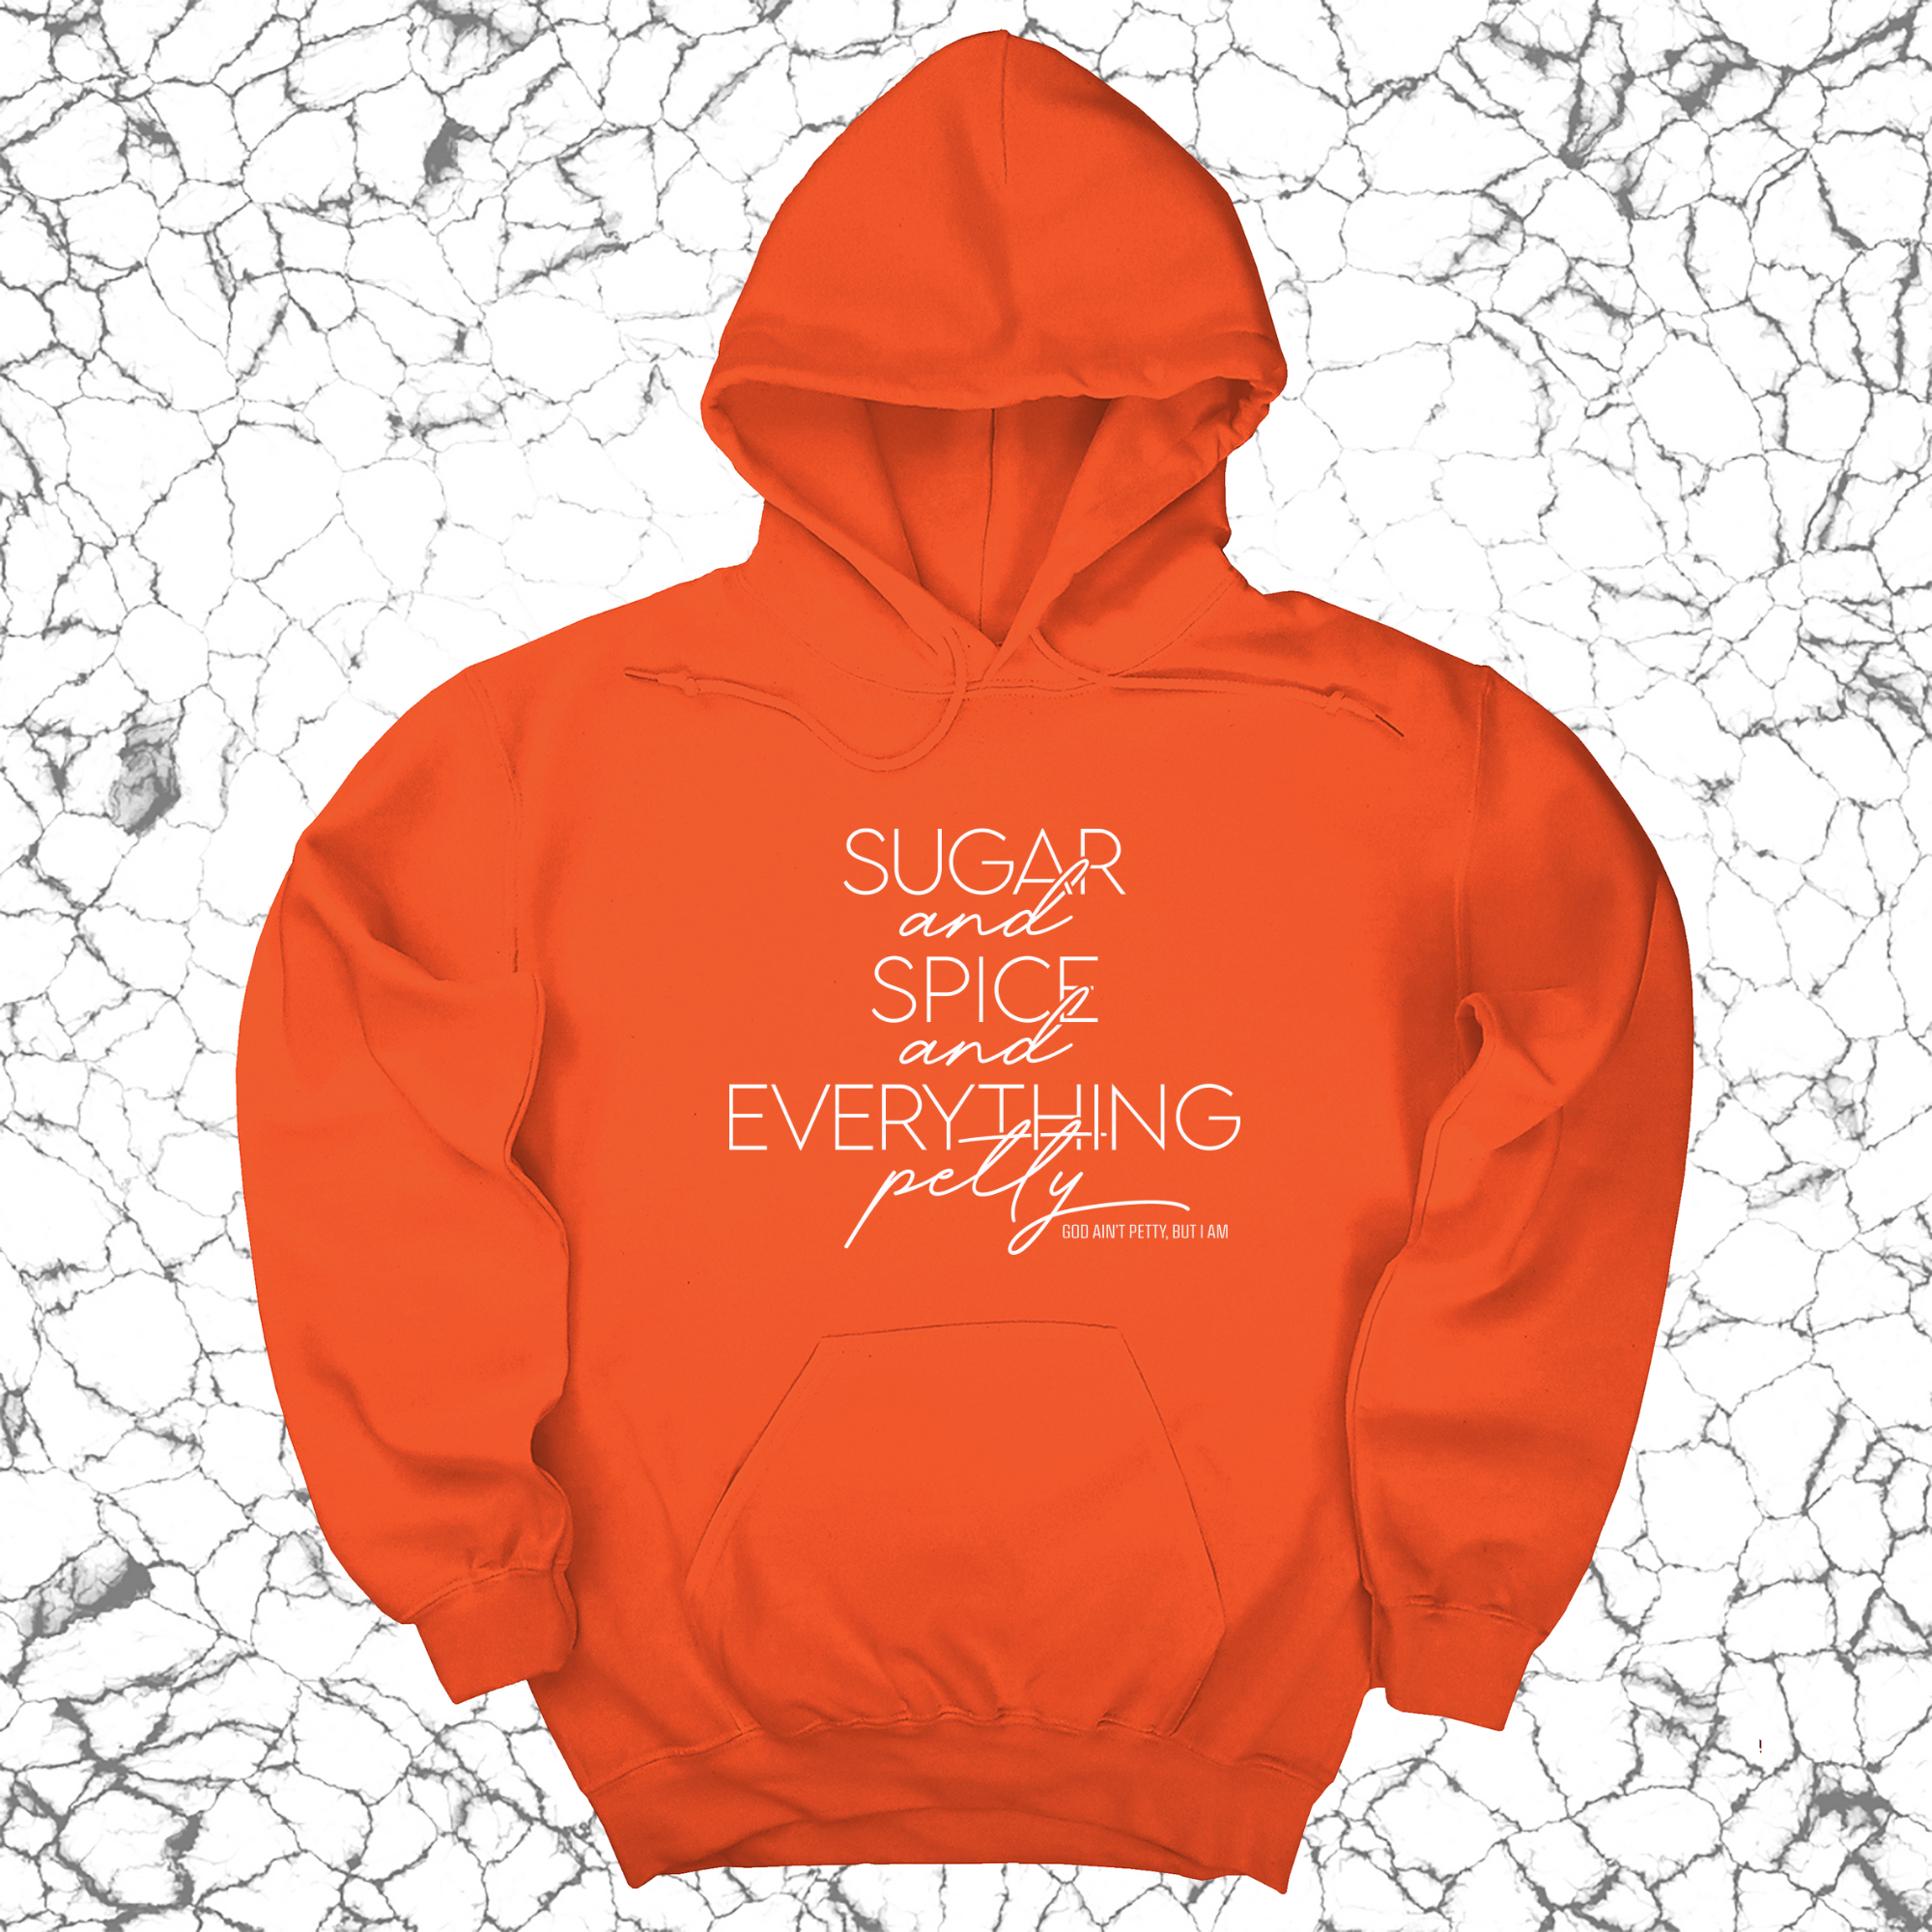 Sugar and Spice and Everything petty Unisex Hoodie-Hoodie-The Original God Ain't Petty But I Am